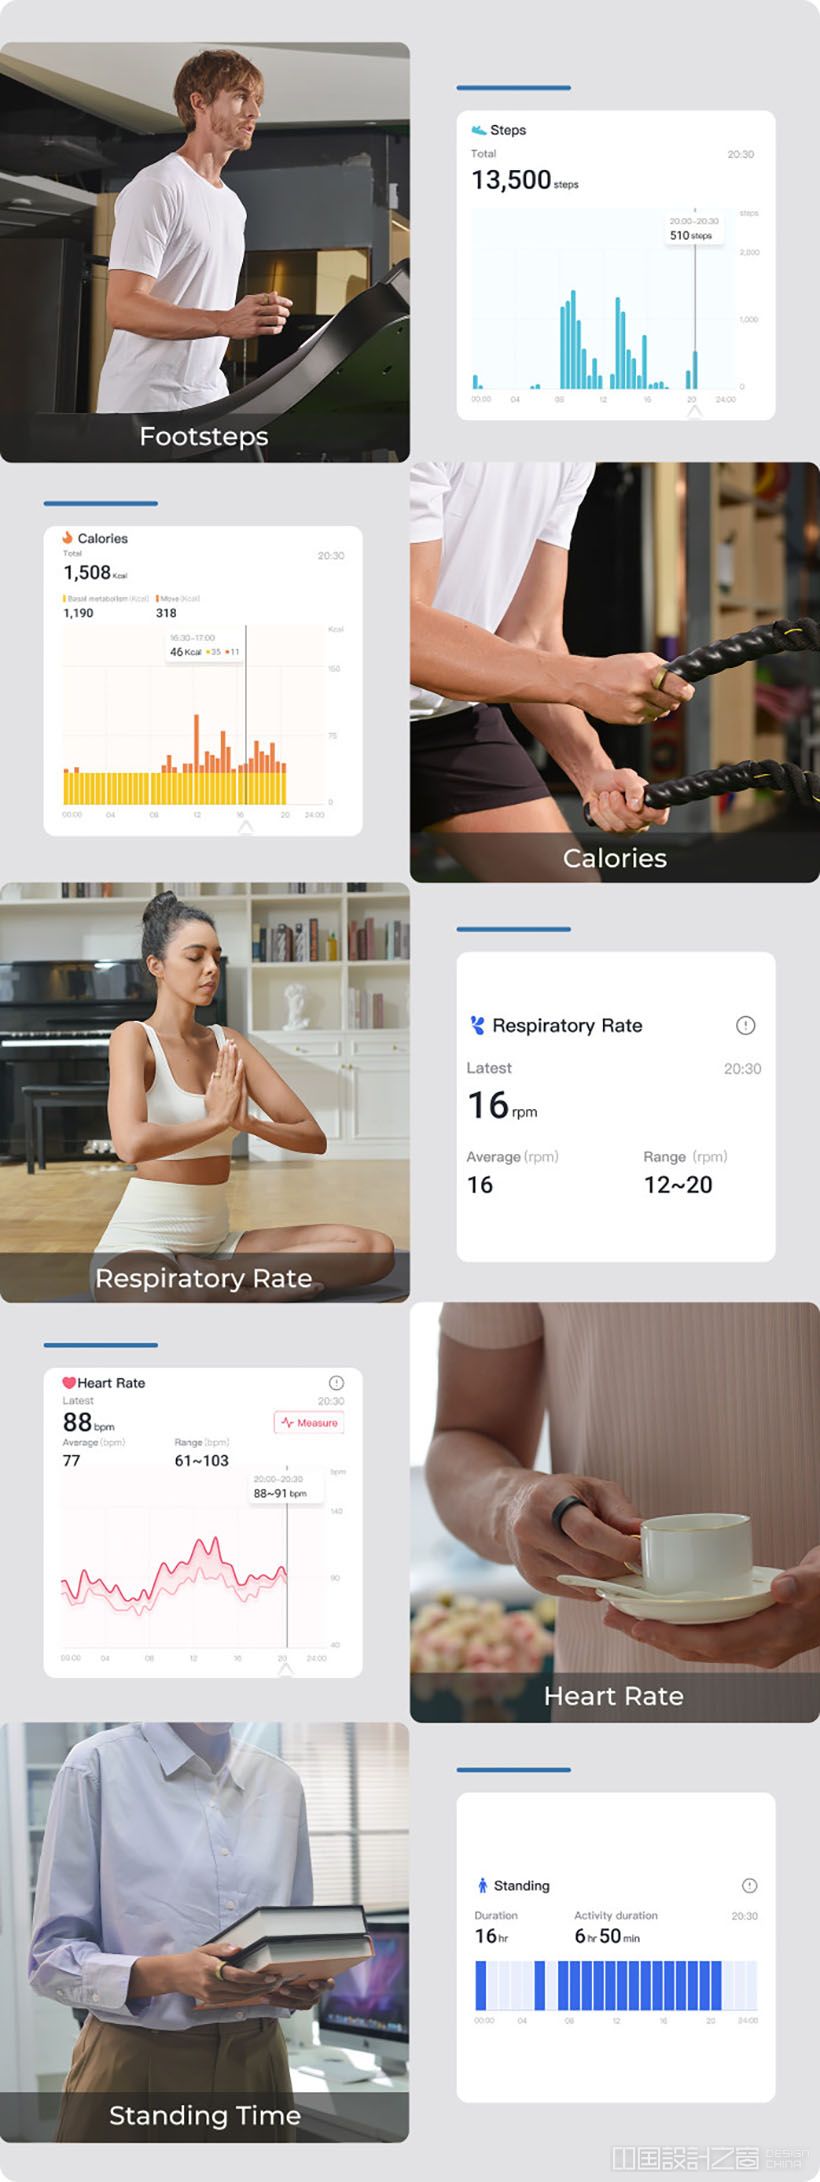 RingConn Smart Ring - Wearable Smart Device To Measures Your Health Metrics